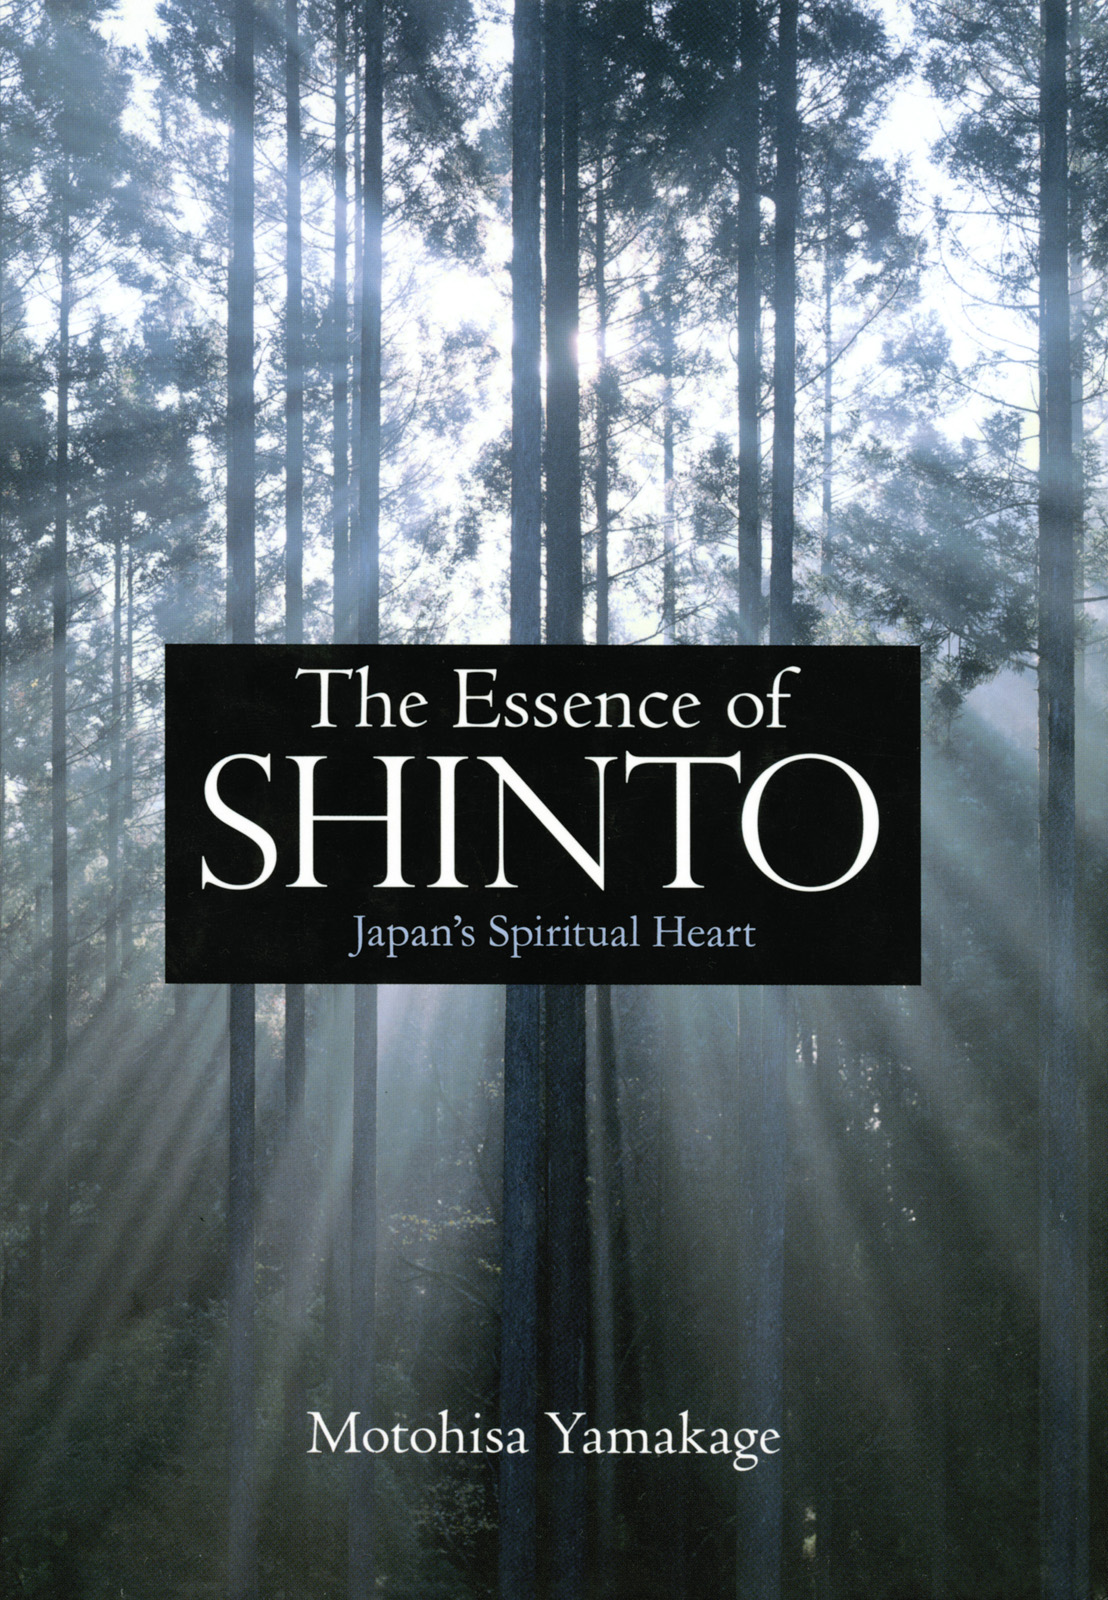 The Essence of Shinto